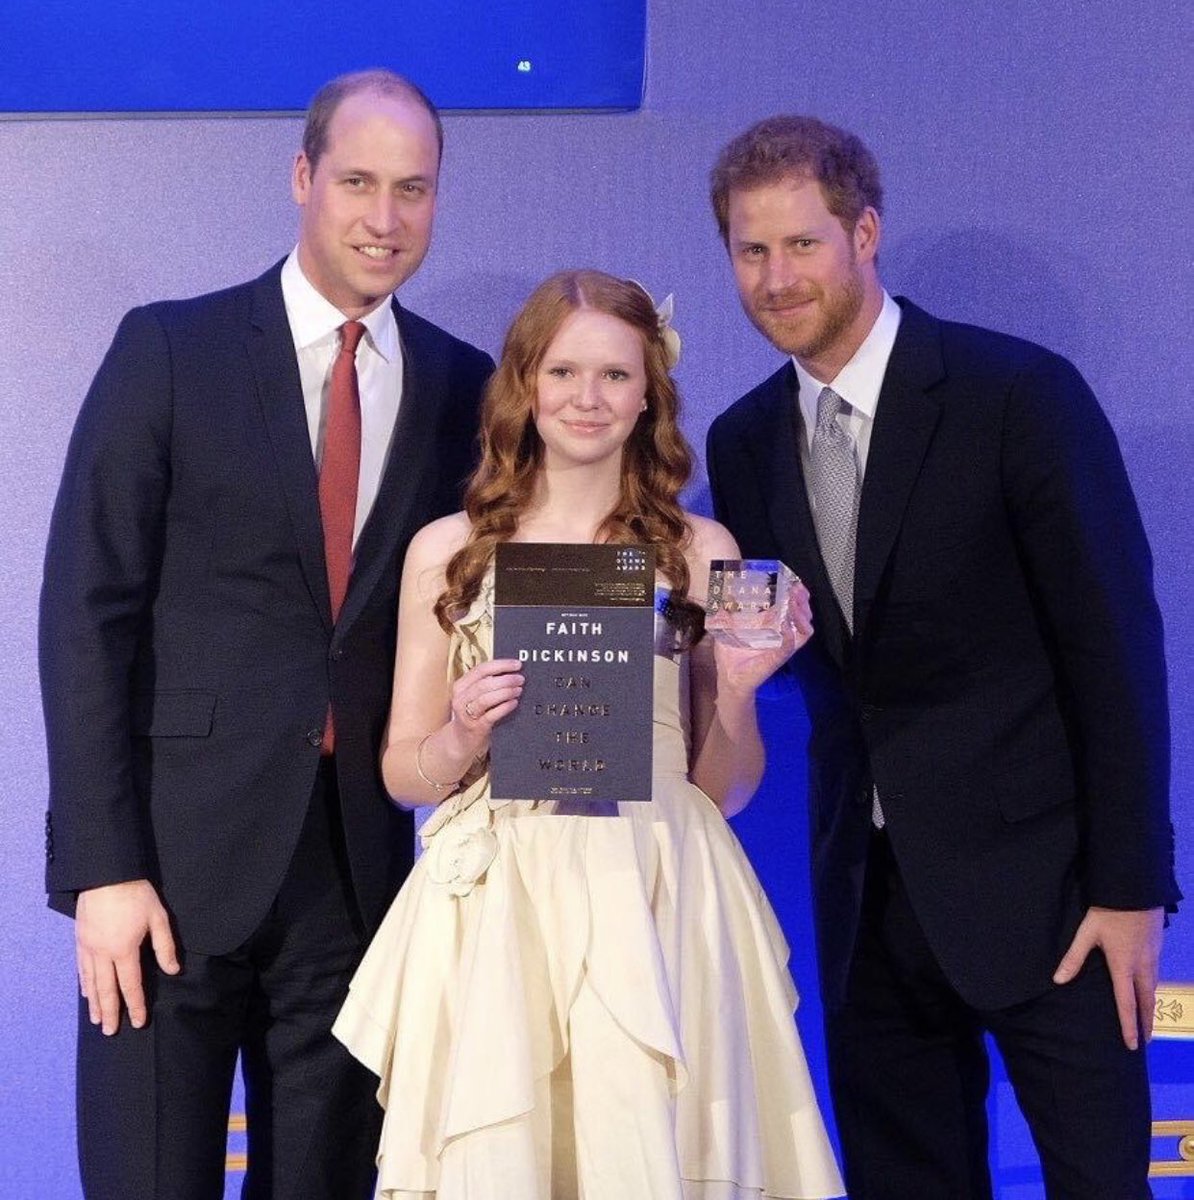 Six years ago today our Founder received one of the inaugural Diana Legacy Awards 💙 people.com/royals/cuddles…  @FaithIDickinson @DianaAward @KensingtonRoyal #DukeofSussex #10000Blankets #50CountriesWorldwide #YoureNeverTooYoungToMakeADifference